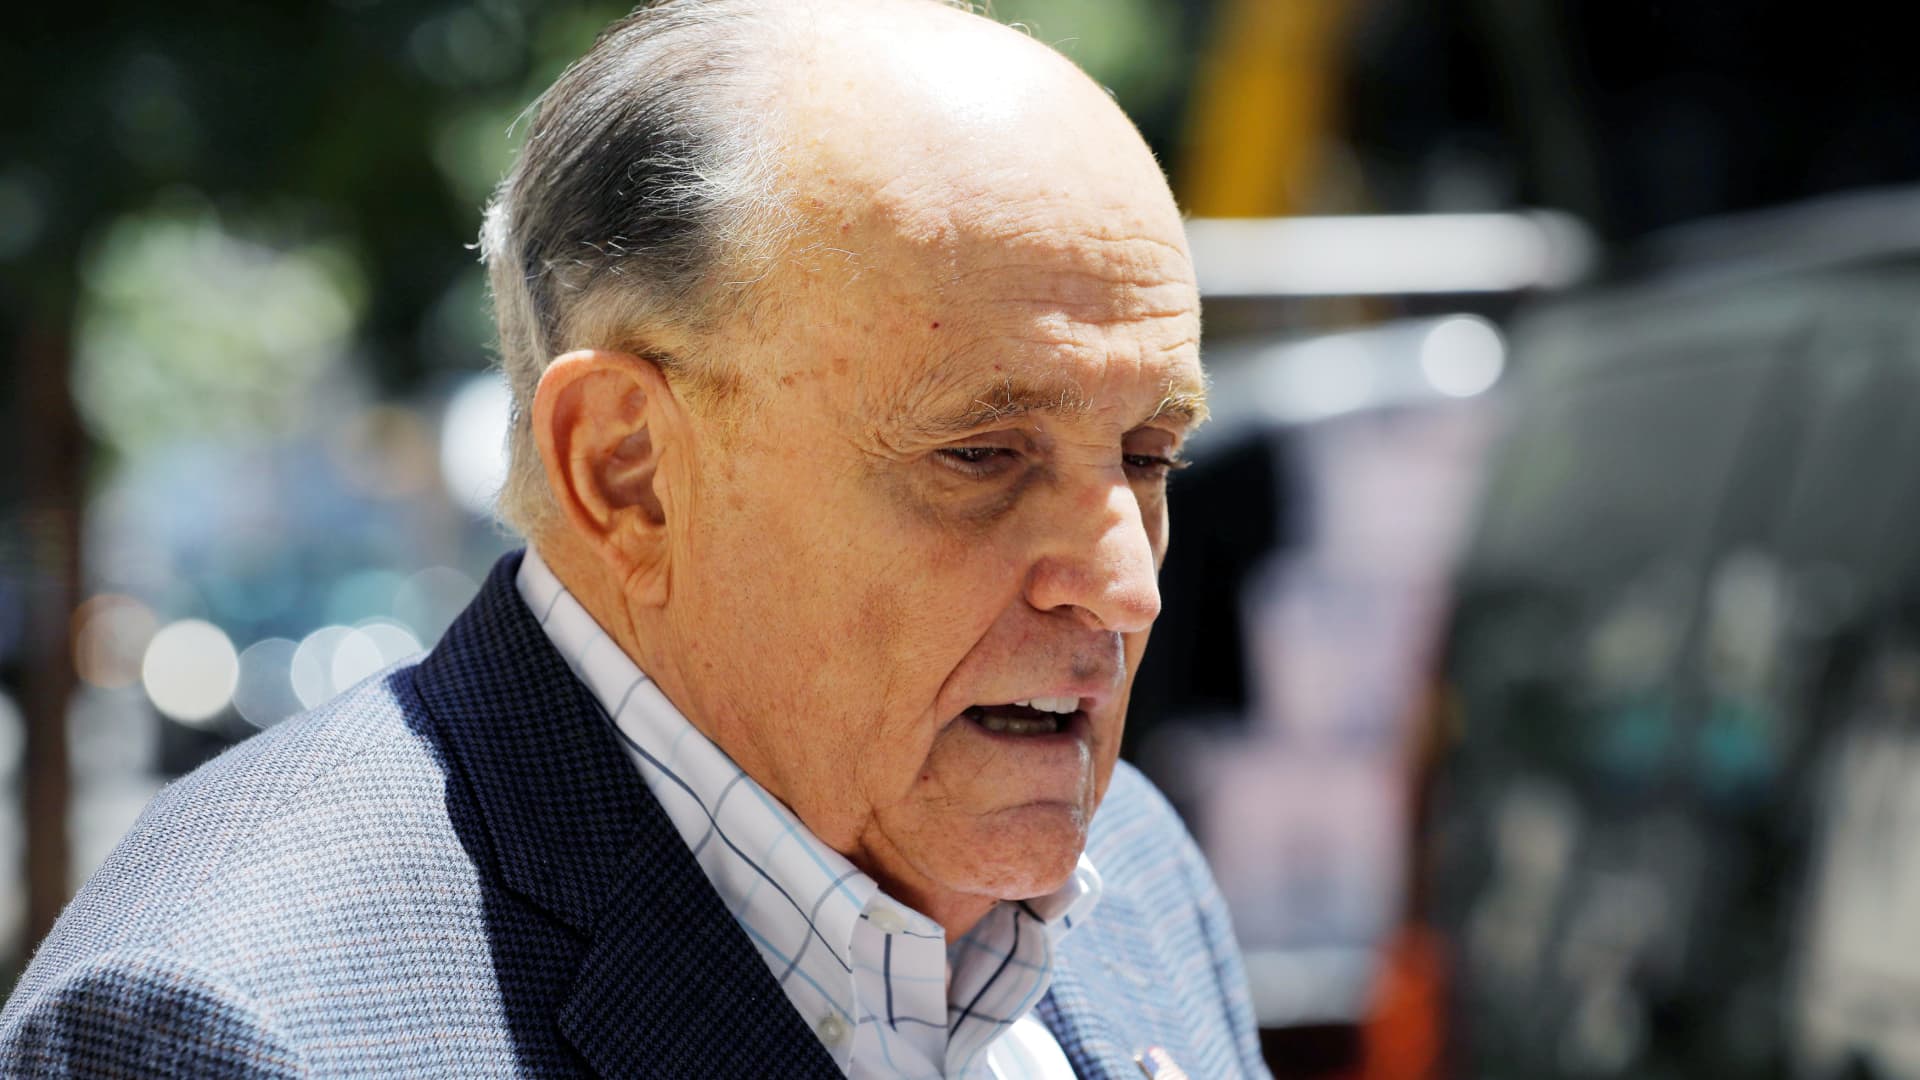 Rudy Giuliani ordered to testify at Georgia grand jury in Trump election meddling investigation